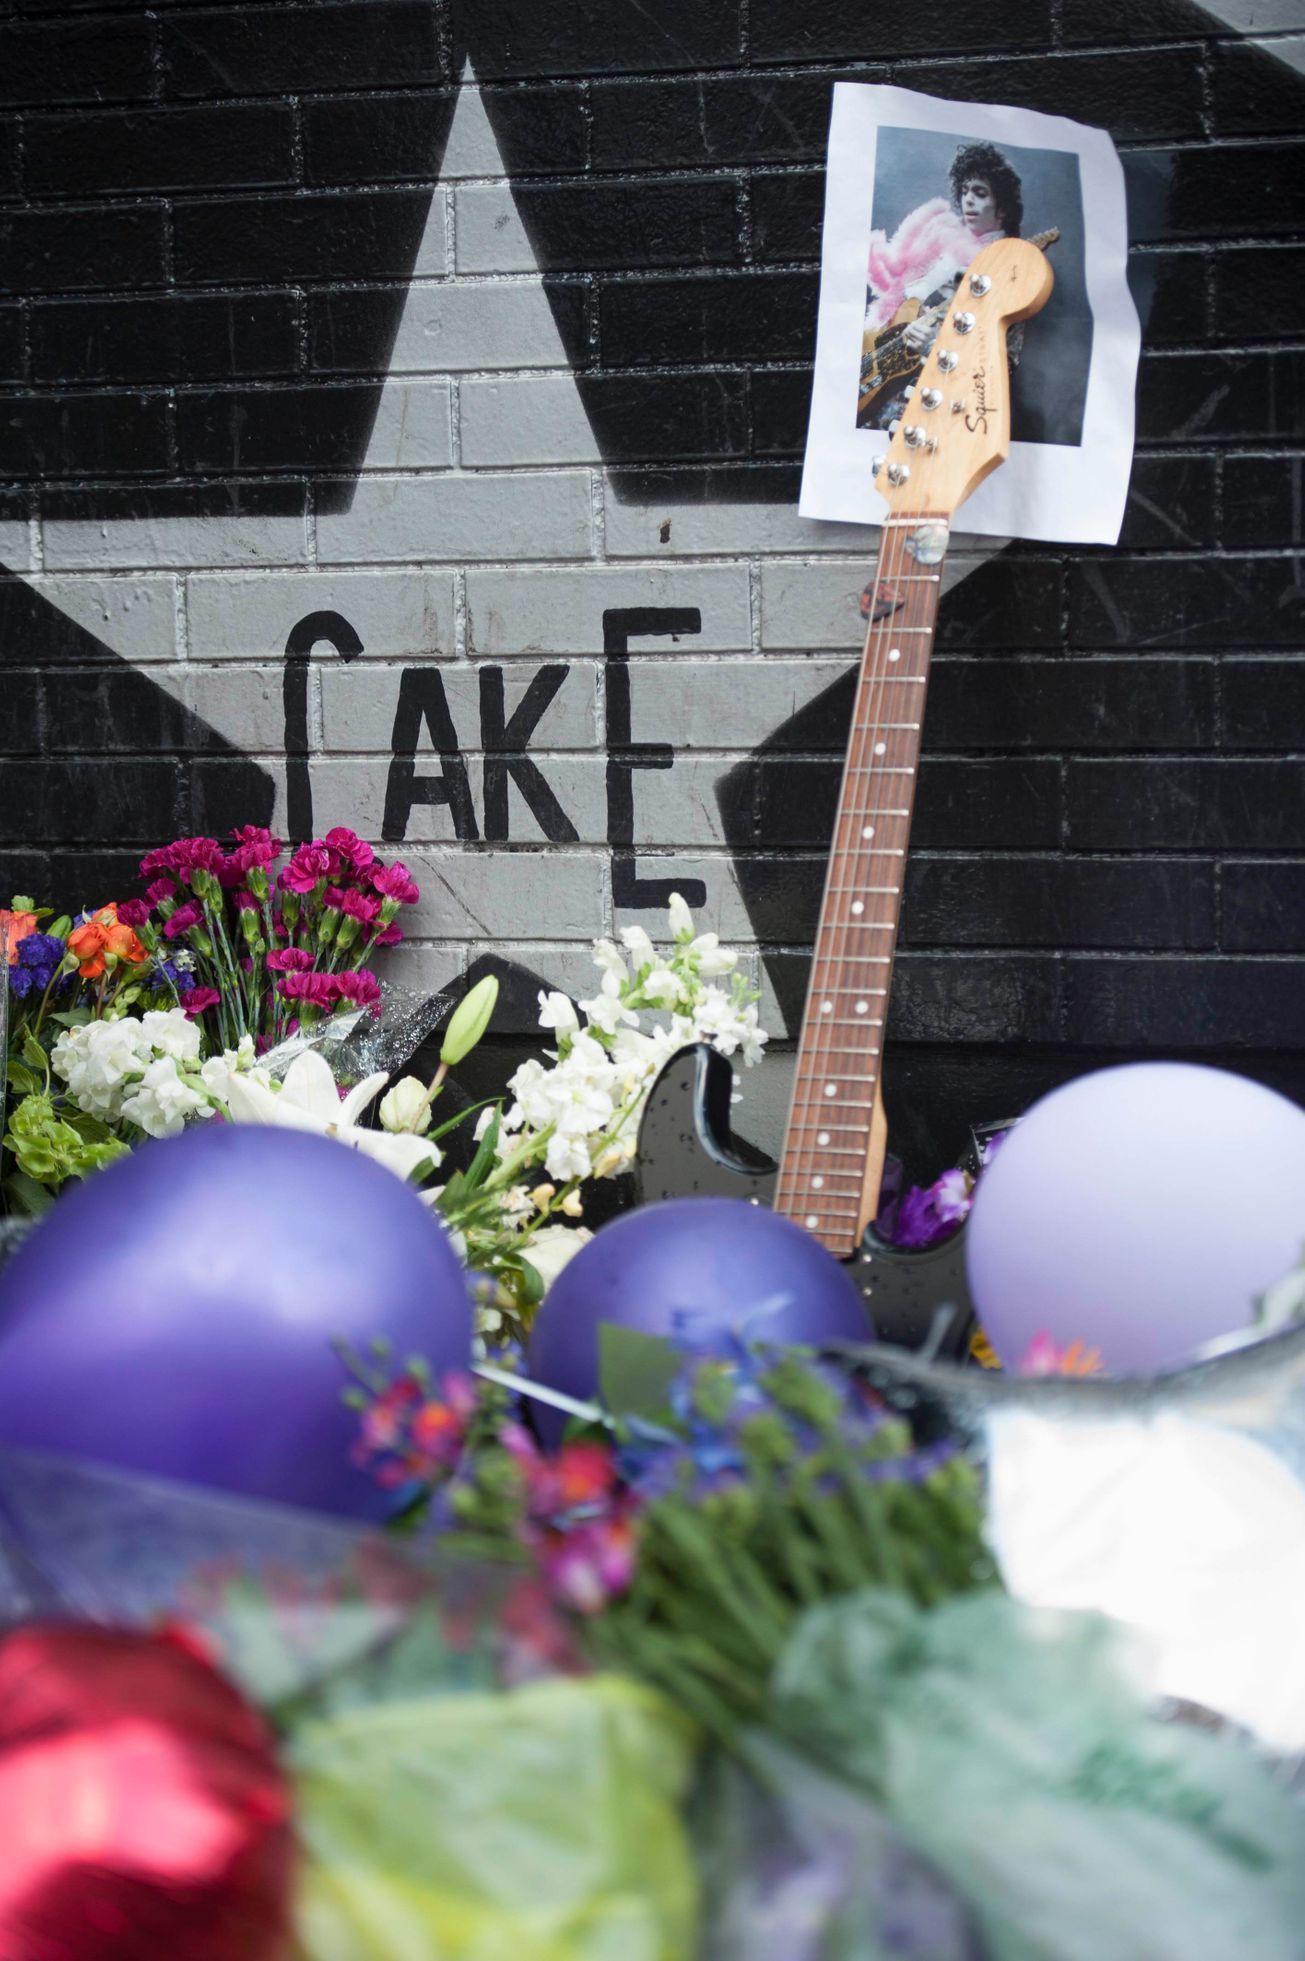 A photo of Prince is held up by a guitar leaning against First Avenue, the nightclub where U.S. music superstar Prince got his start in Minneapolis Minnesota